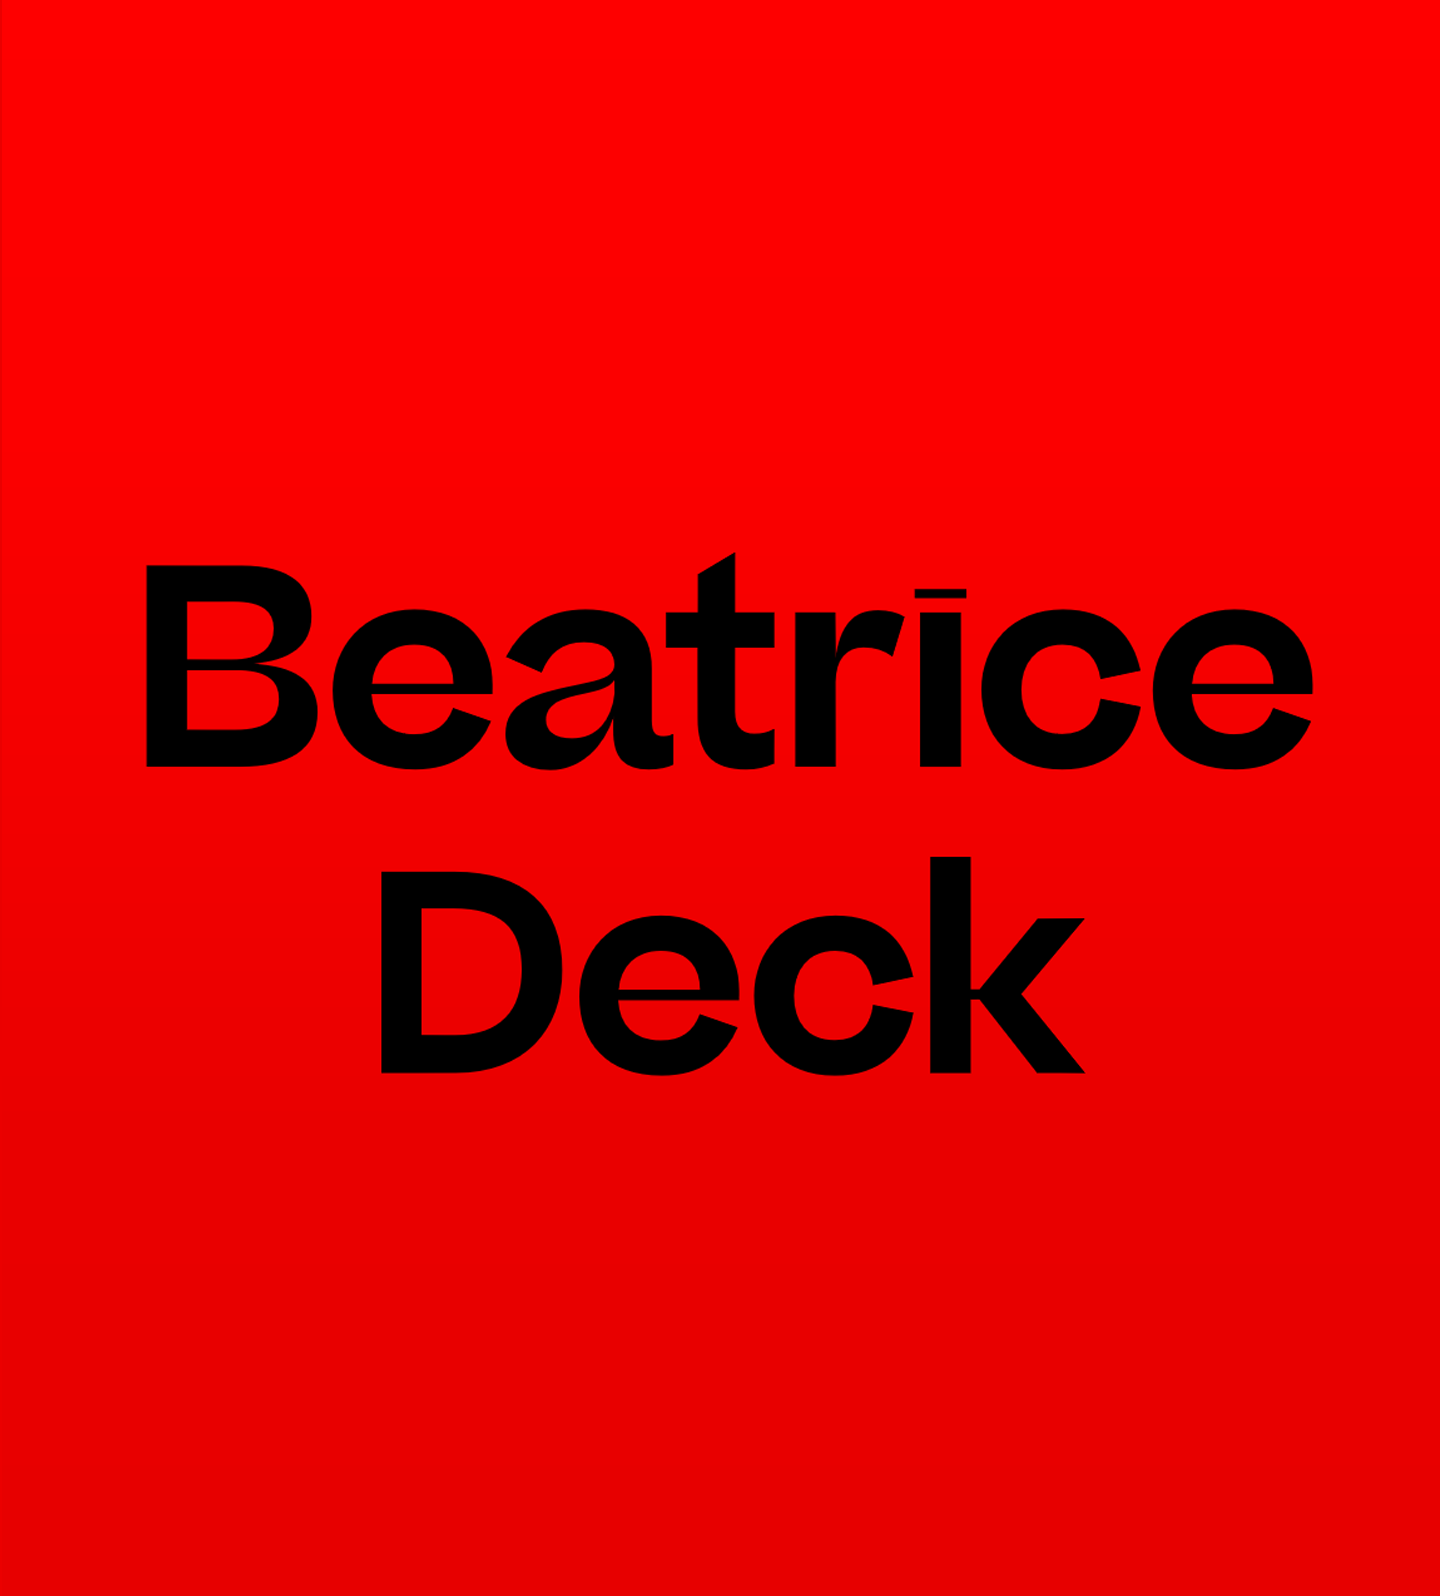 Beatrice Deck Thin Italic Font preview